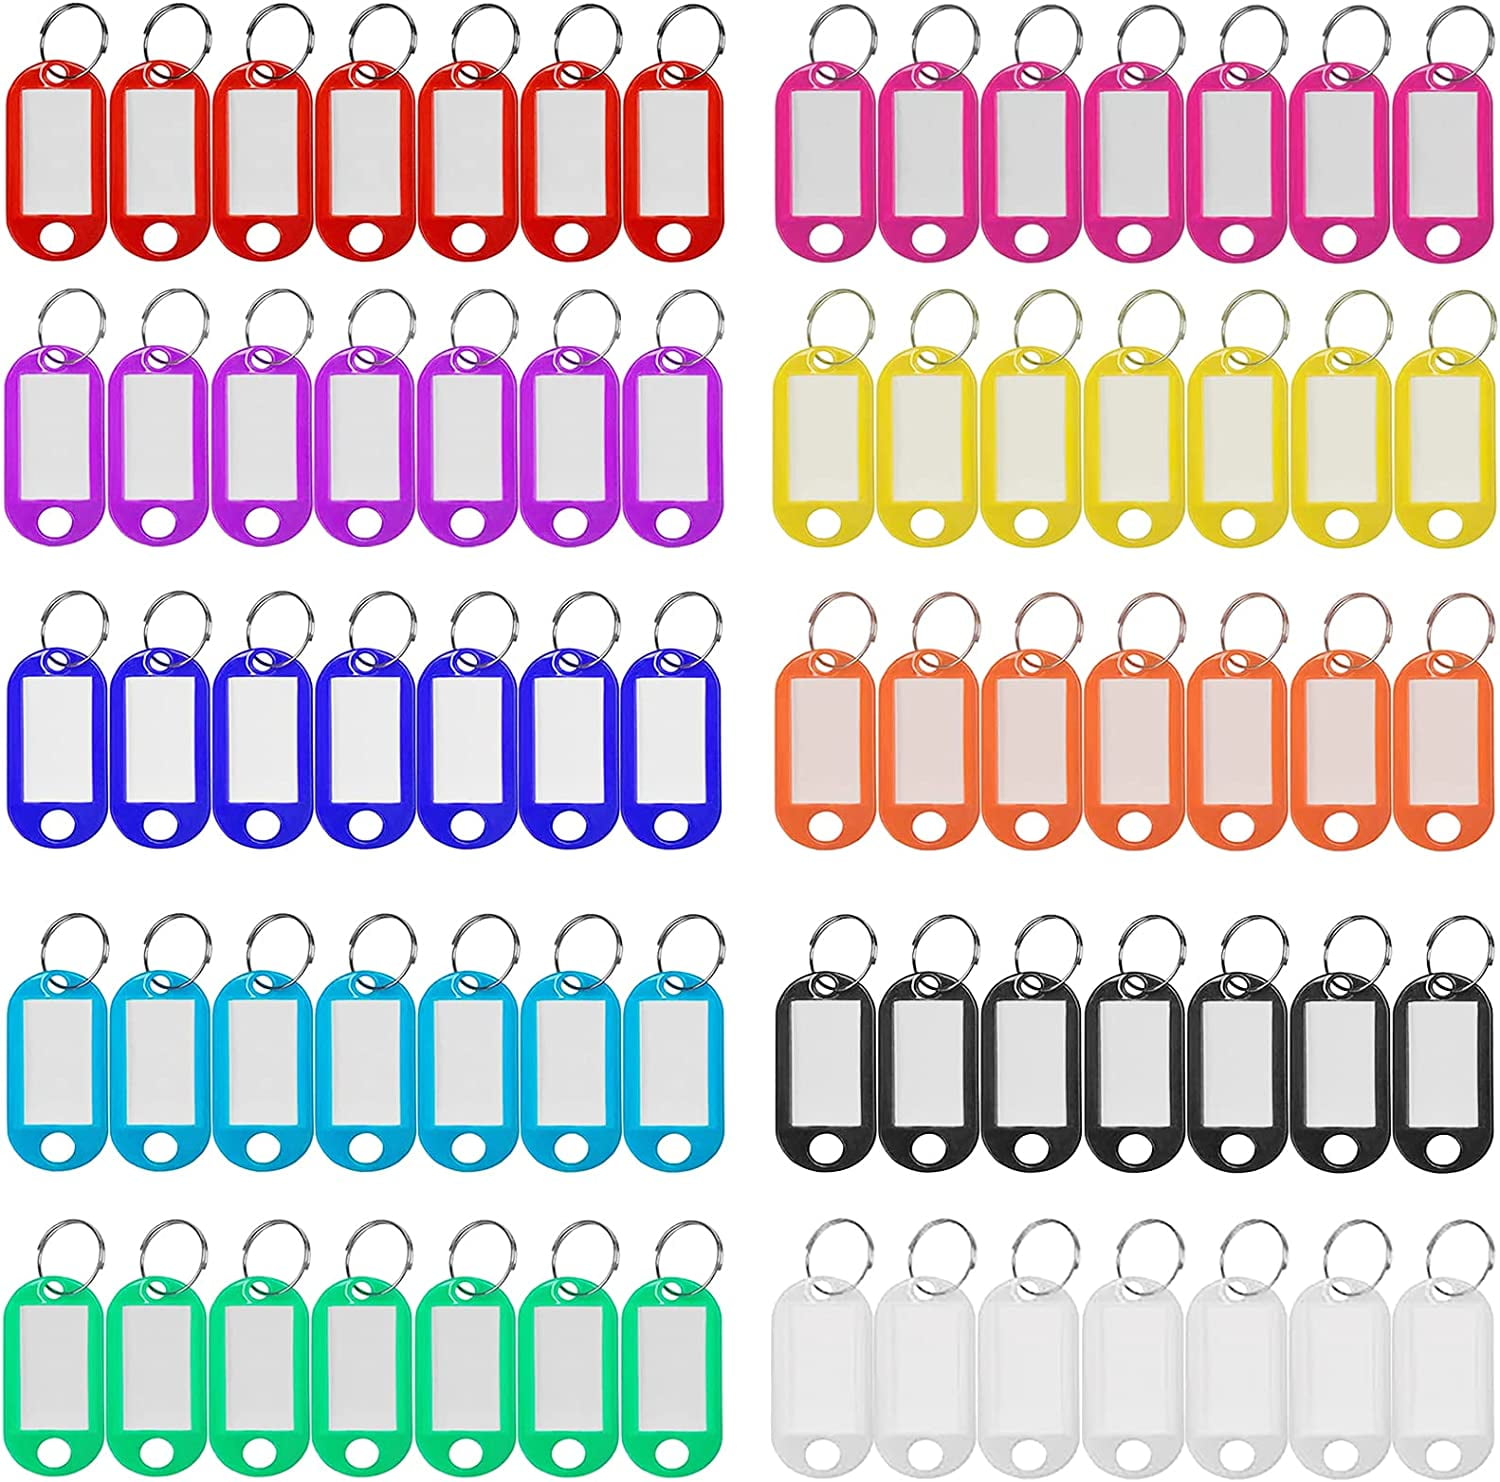 Key Labels, 50 Pcs Key Tags with Ring and Label Window, Key Chain ID Tags  with Container for Luggage, Backpacks, Key (Assorted Colors)